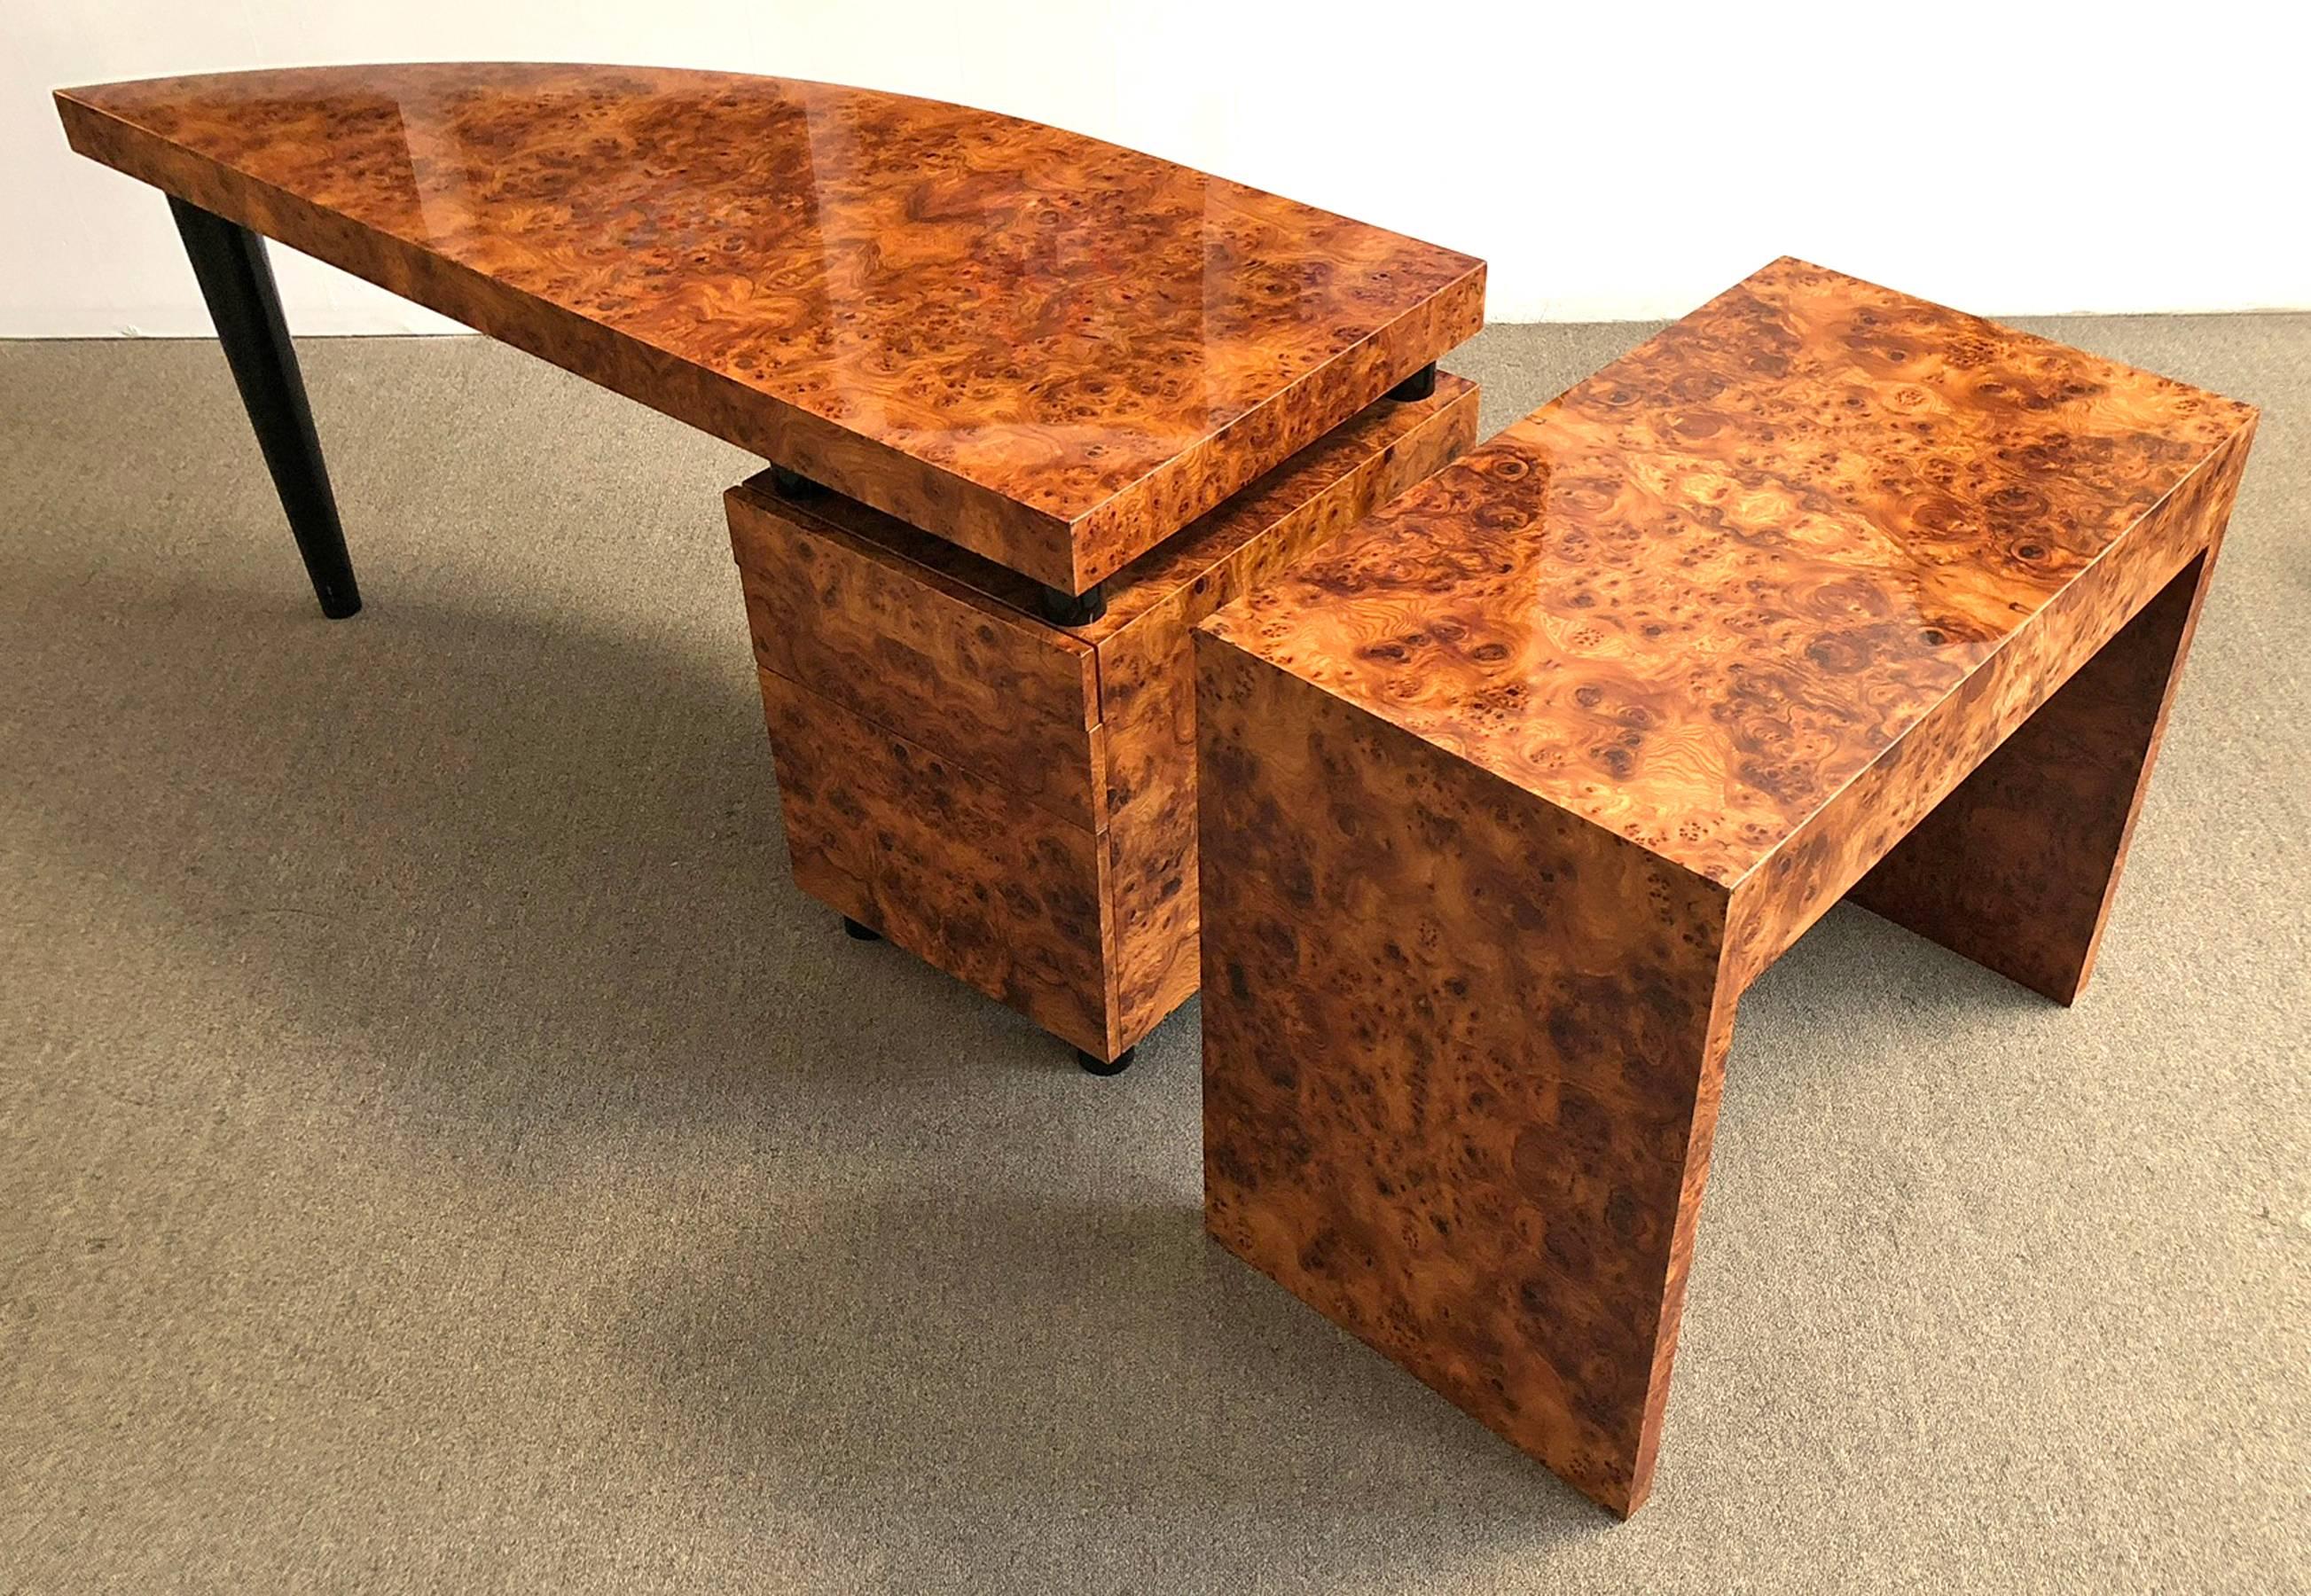 Hand-Crafted Pace Collection Desk or Console Table by Leon Rosen